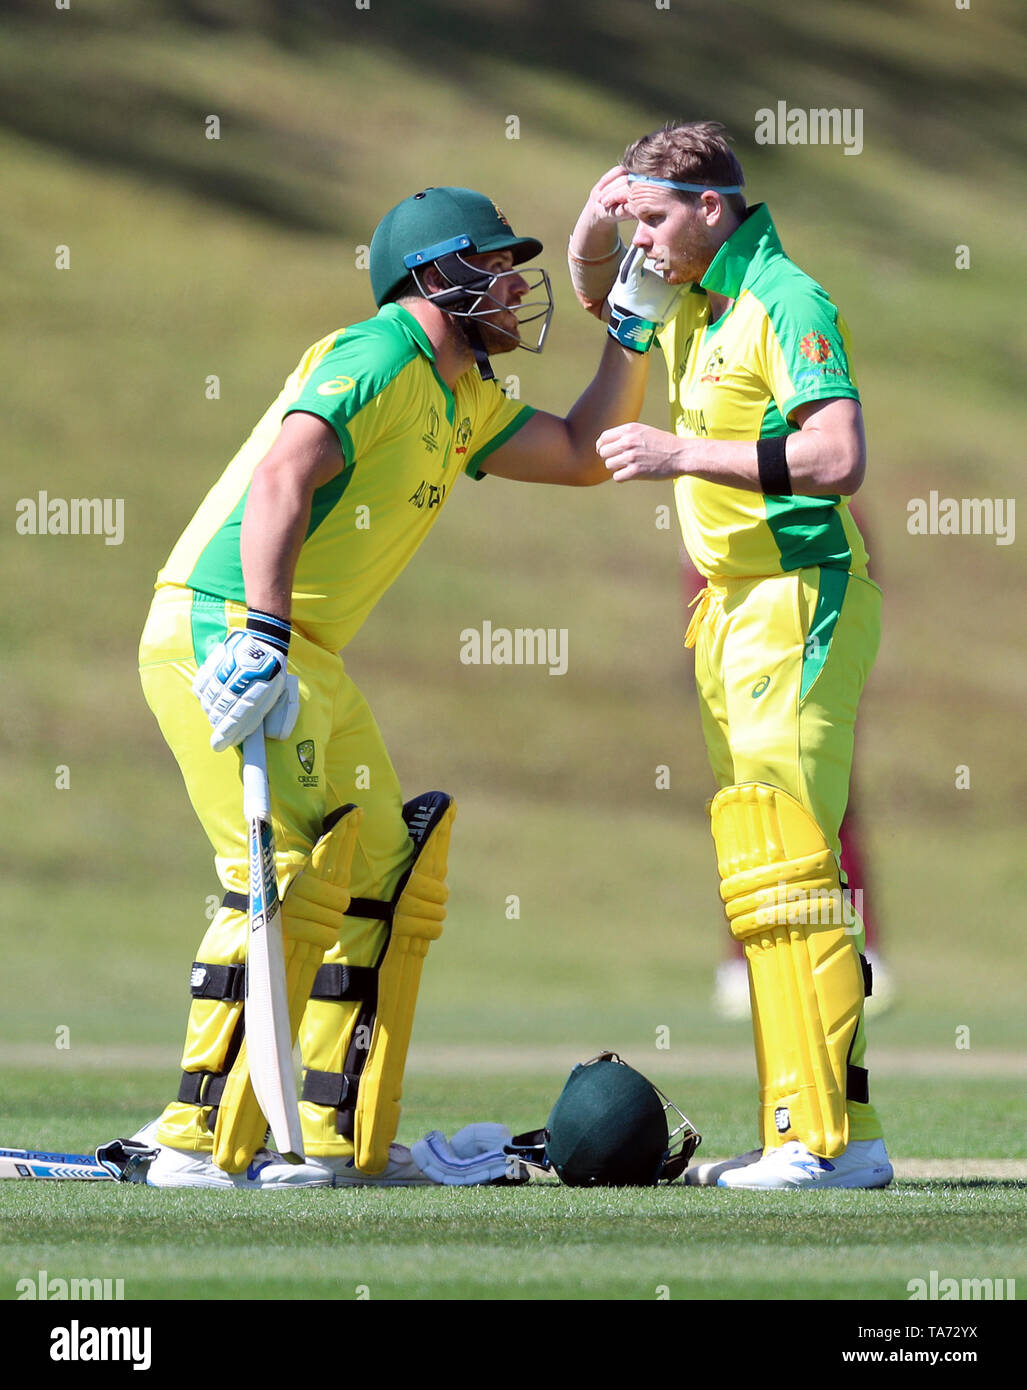 Australia's Aaron Finch (left) helps team mate Steve Smith check his eye during the World Cup warm-up match at the Nursery Ground, Southampton. Stock Photo